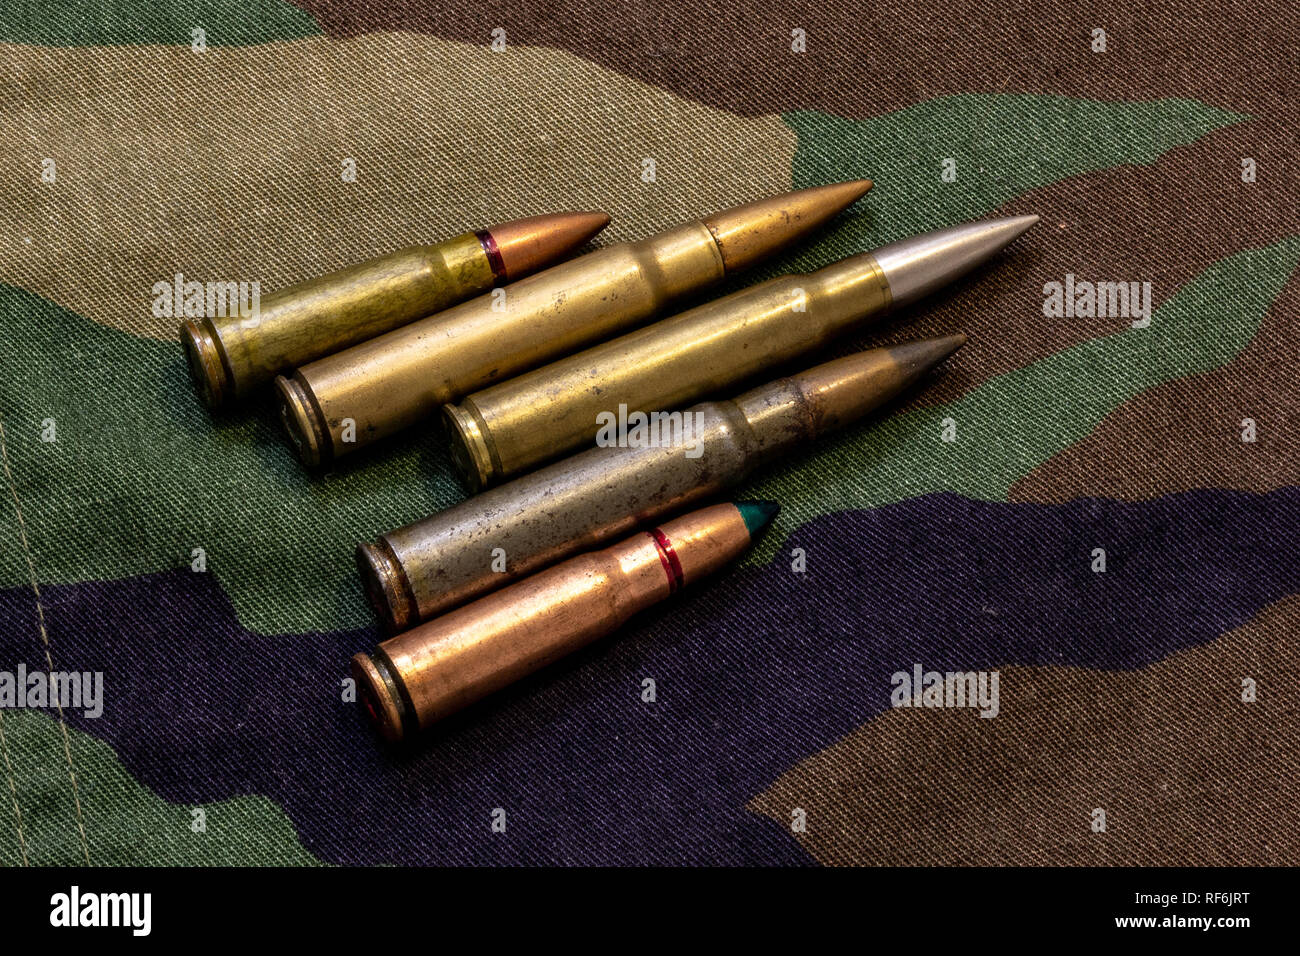 Five rifle bullets on military camouflage coat at background Stock Photo